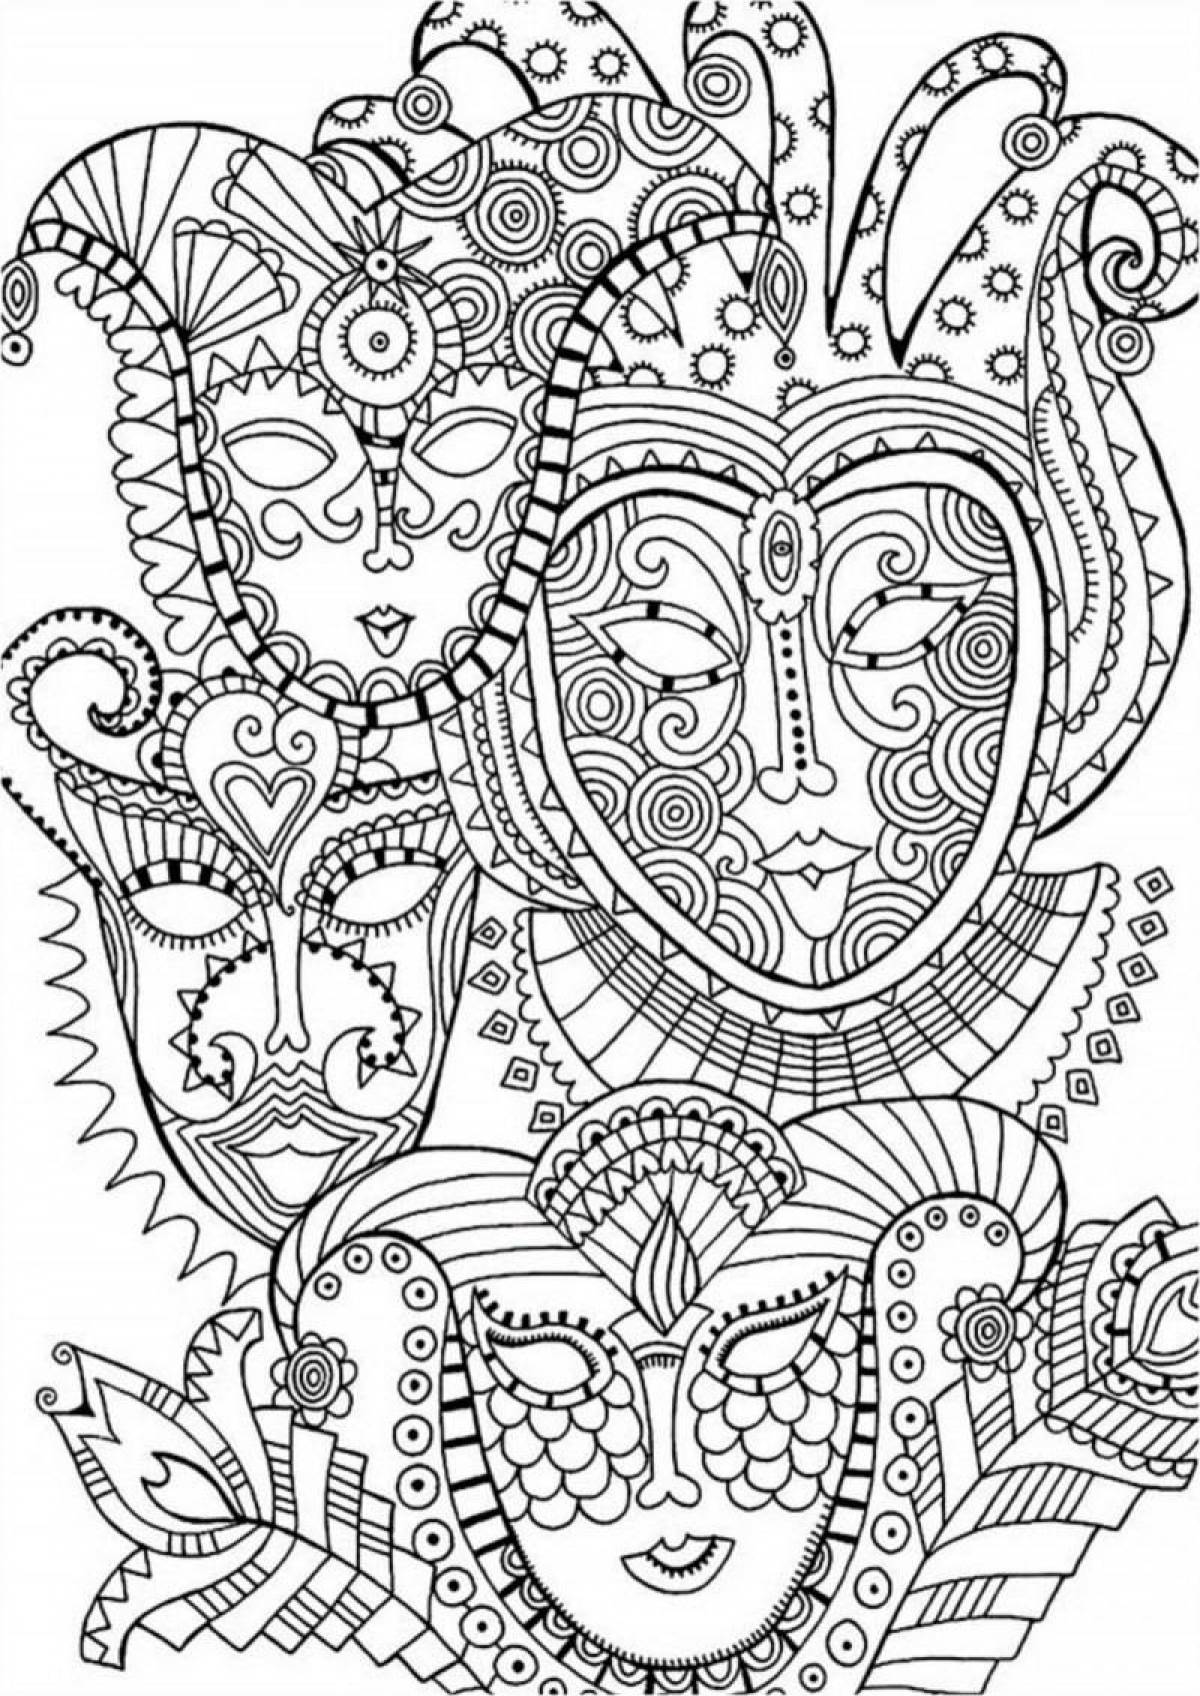 Delightful adult coloring book